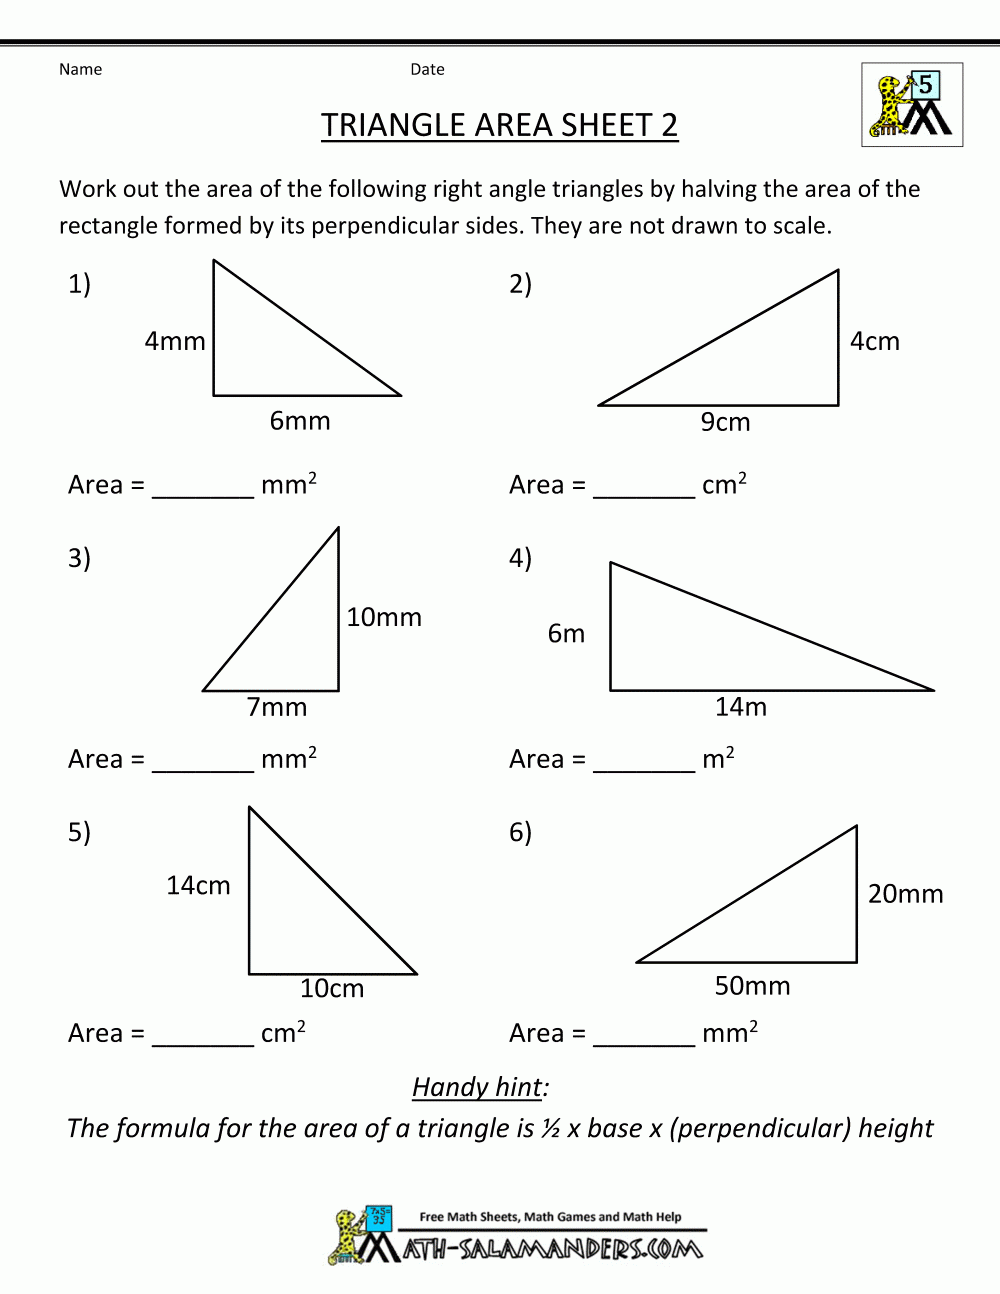 Area Of A Triangle Worksheets 7th Grade Triangle Area Sheet 2 Sheet 2